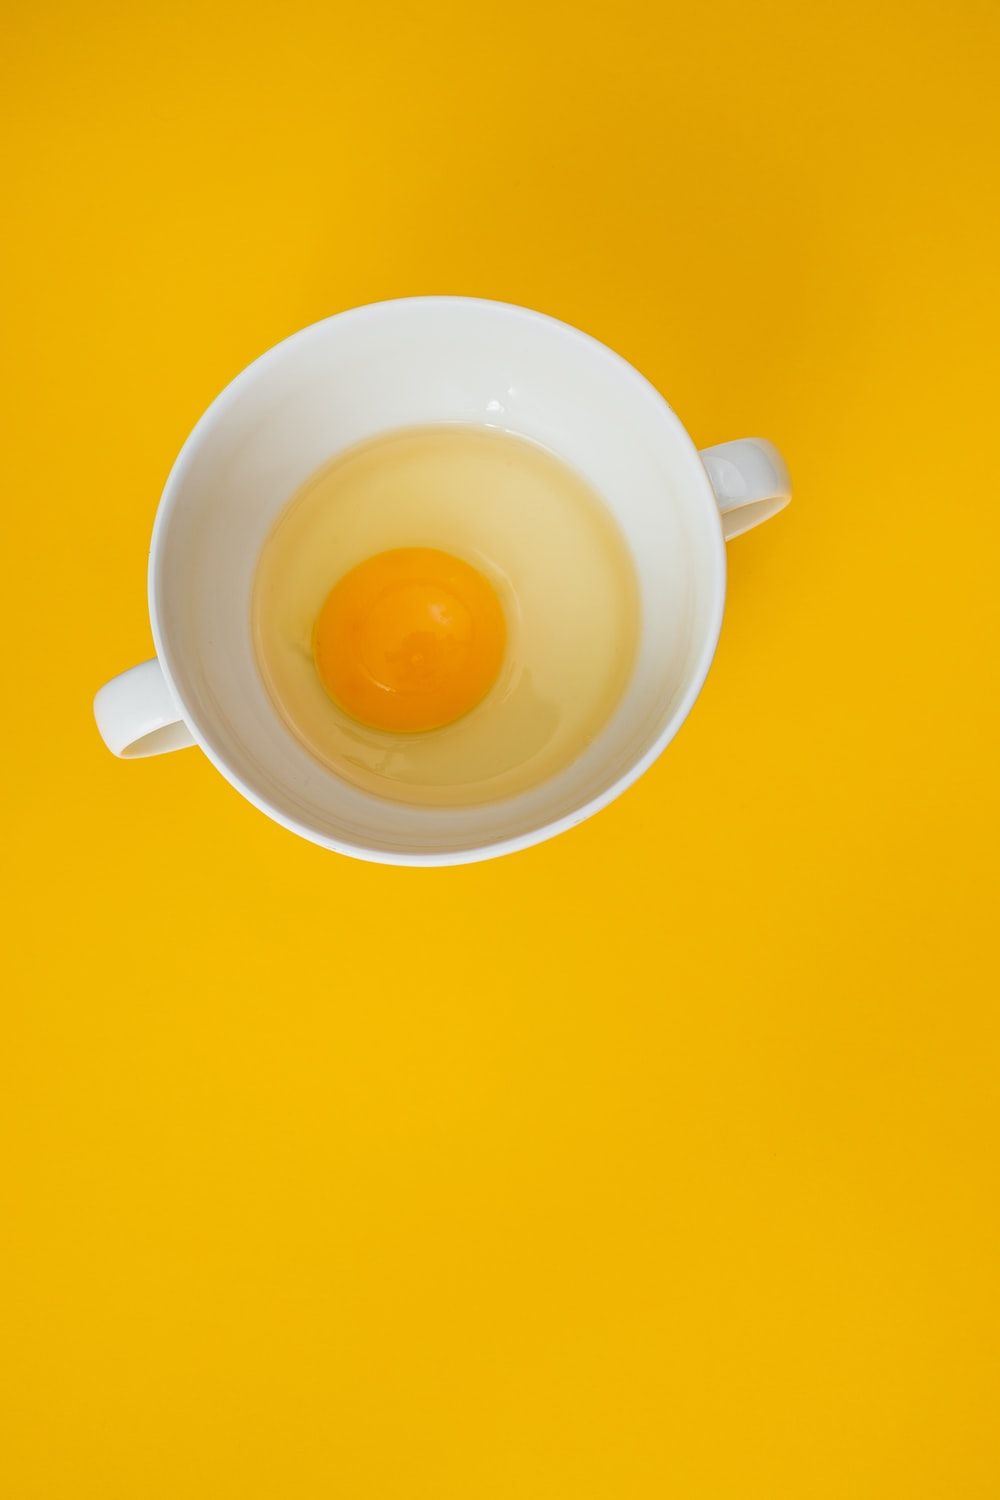 Egg Yolk Picture. Download Free Image